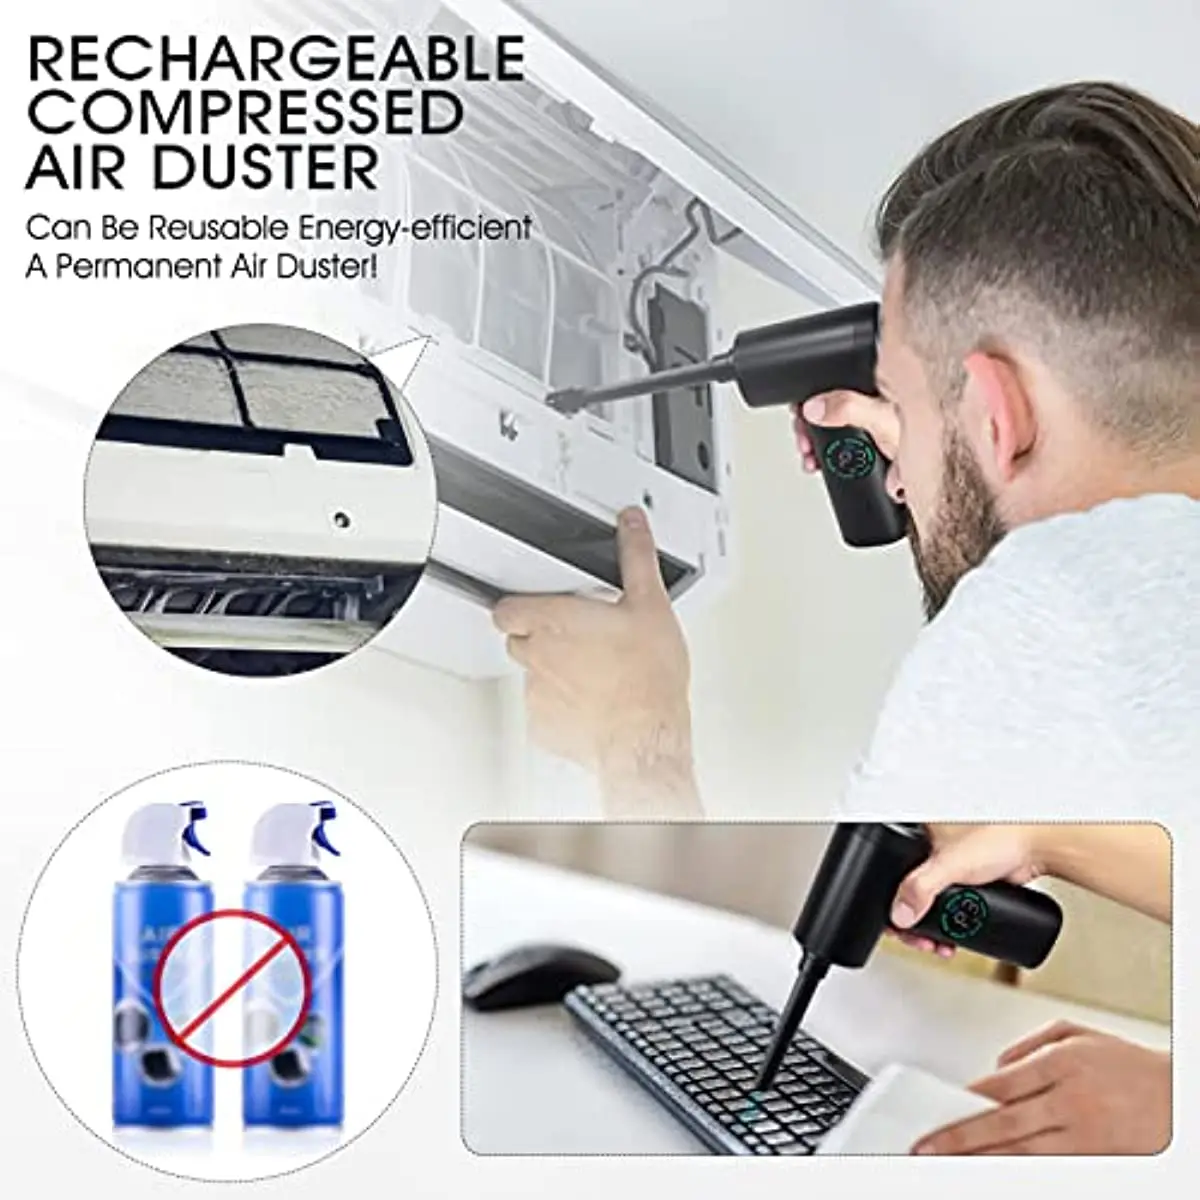 https://ae01.alicdn.com/kf/Sd67d6b67a26c4c03881d6bc6040192032/7500mAh-Portable-Compressed-Air-Duster-2-in-1-Air-Blower-Vacuum-Cleaner-Cordless-Duster-Blower-for.jpg